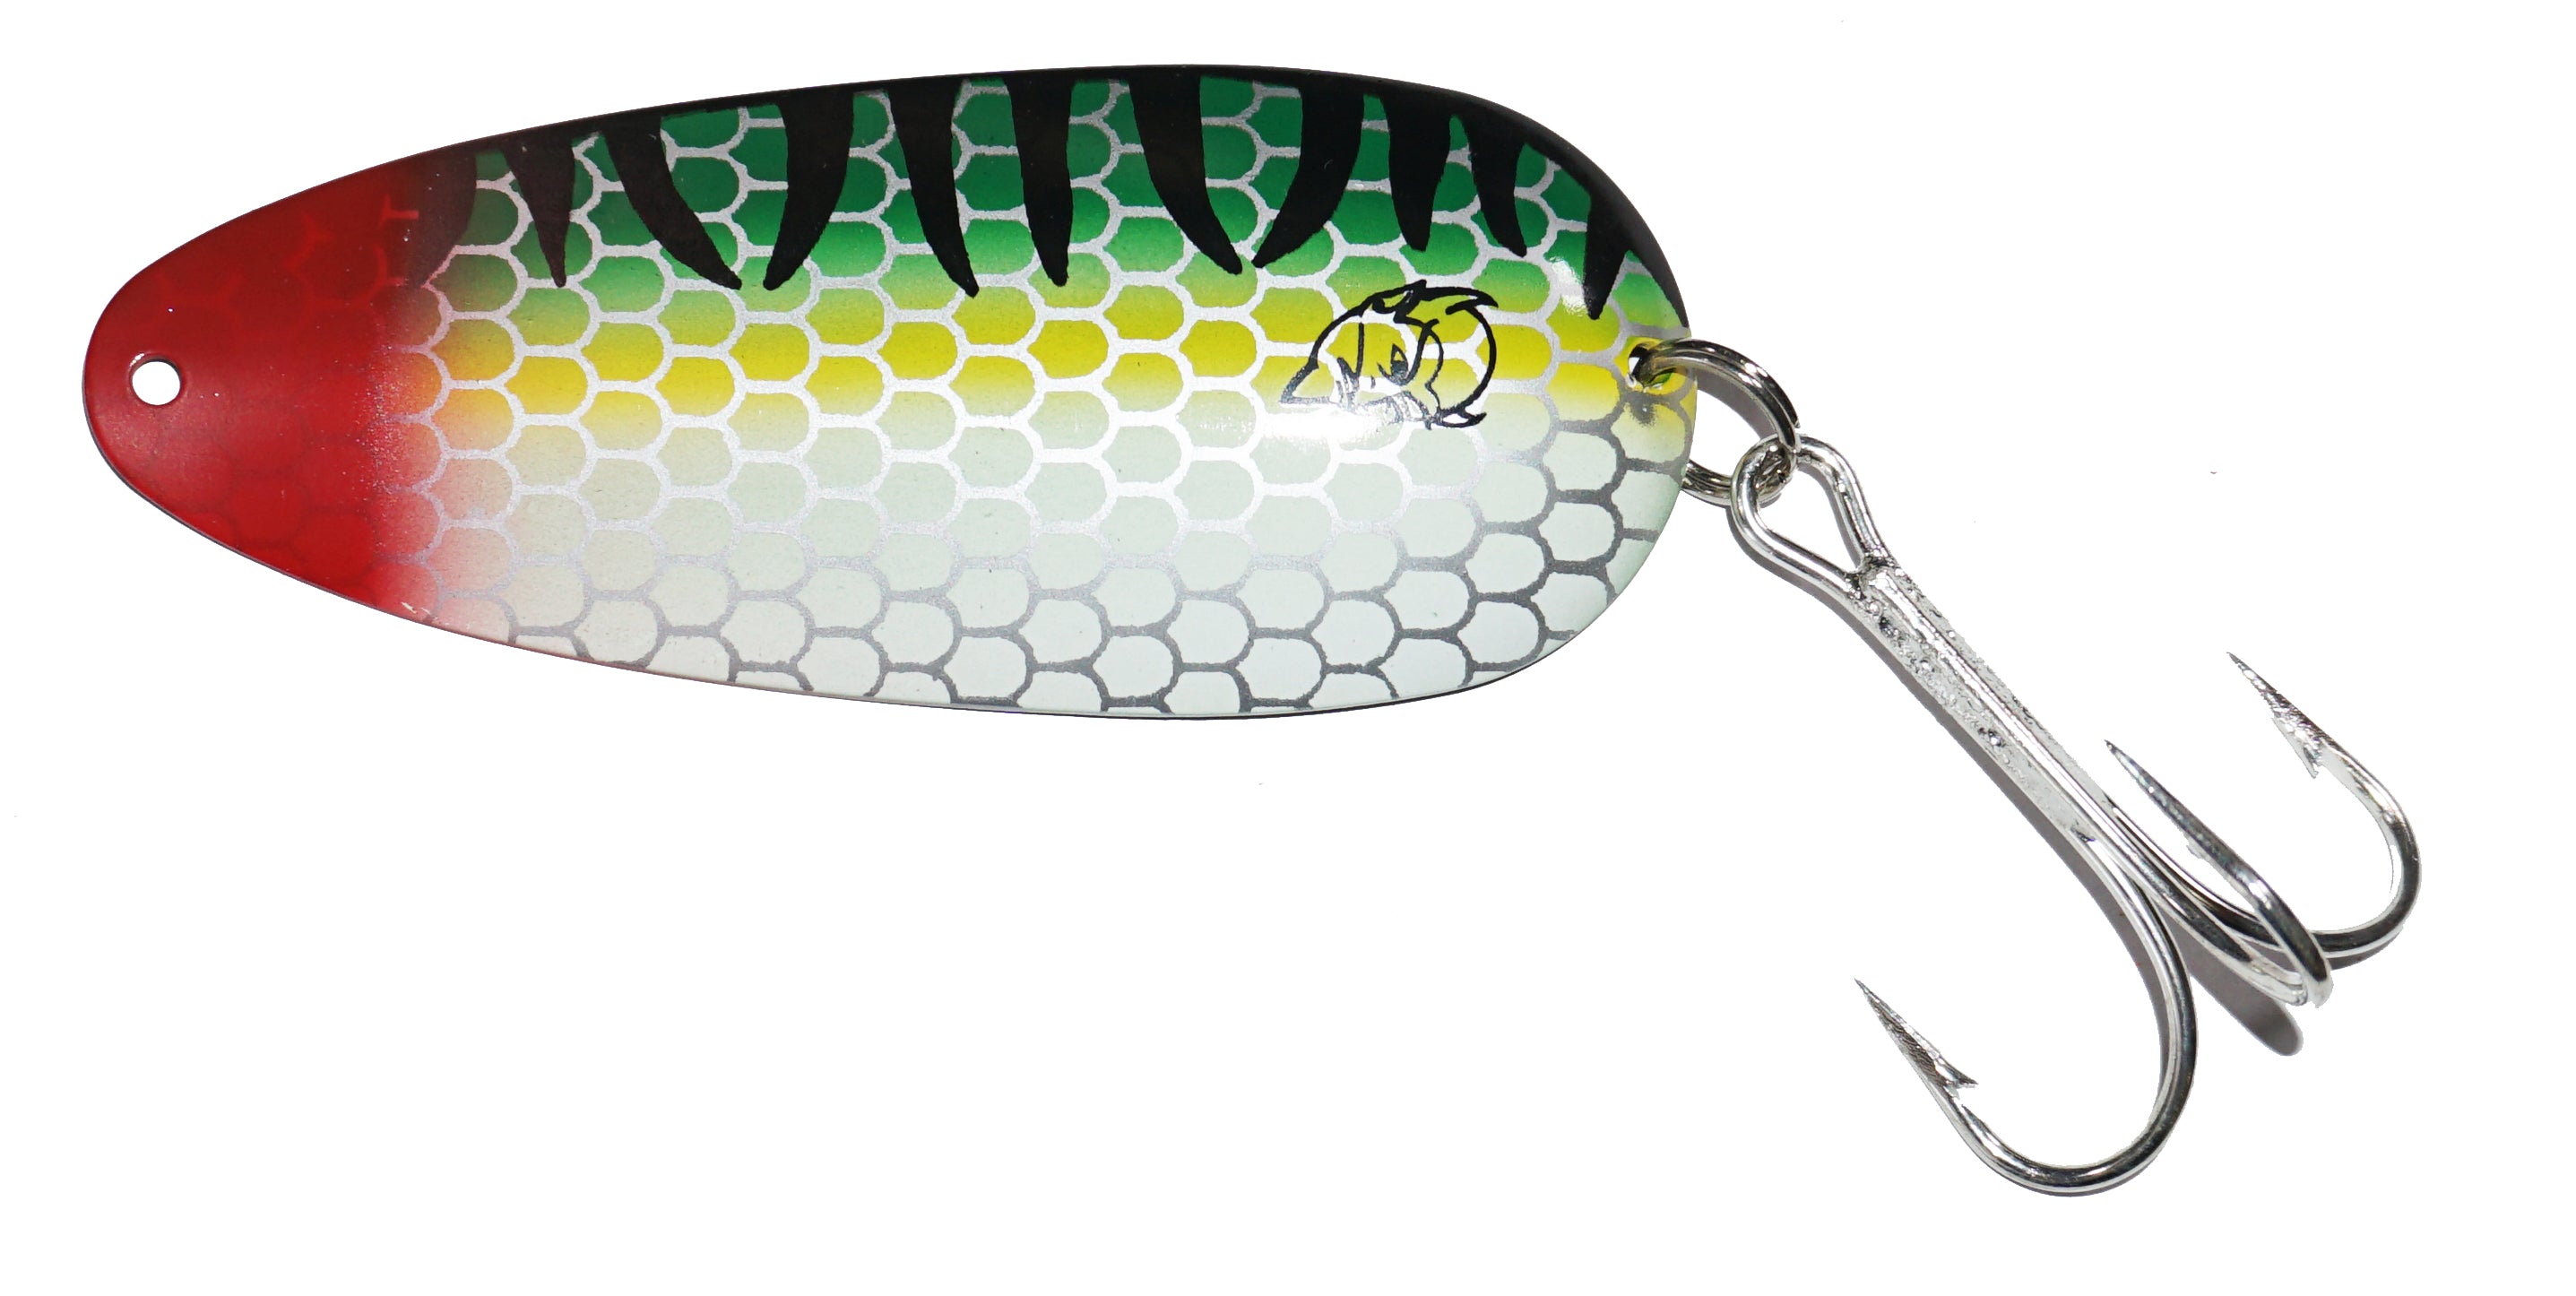 Fishing Lure Daredevil Welcome ™ - LoneTree Designs